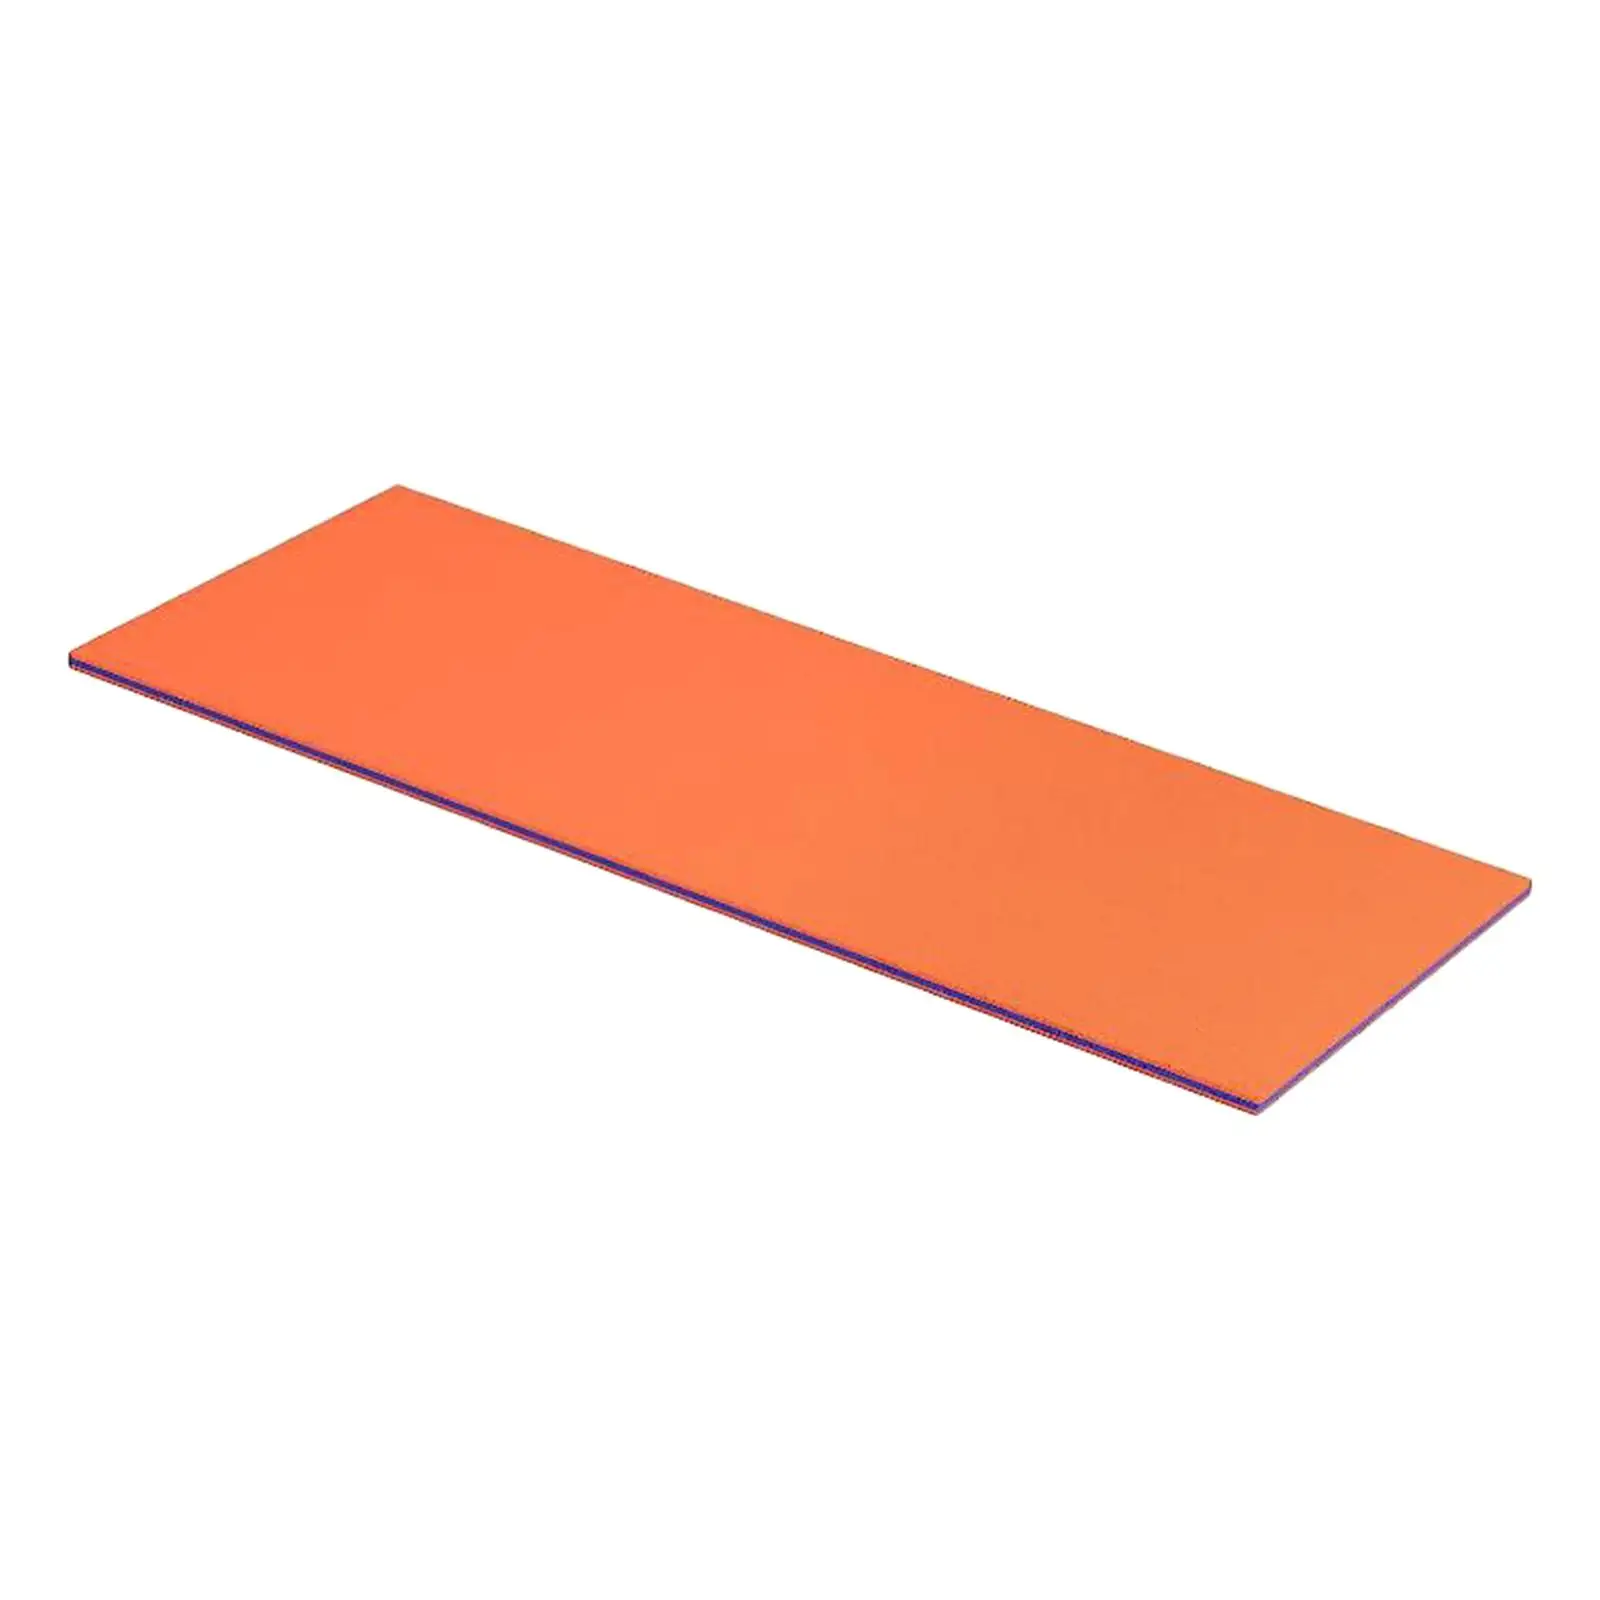 Water Float Mat Float Raft Family Fun Relaxing Pool Mattress Floating Pad for Lake Adults Boat Outdoor Swimming Pool